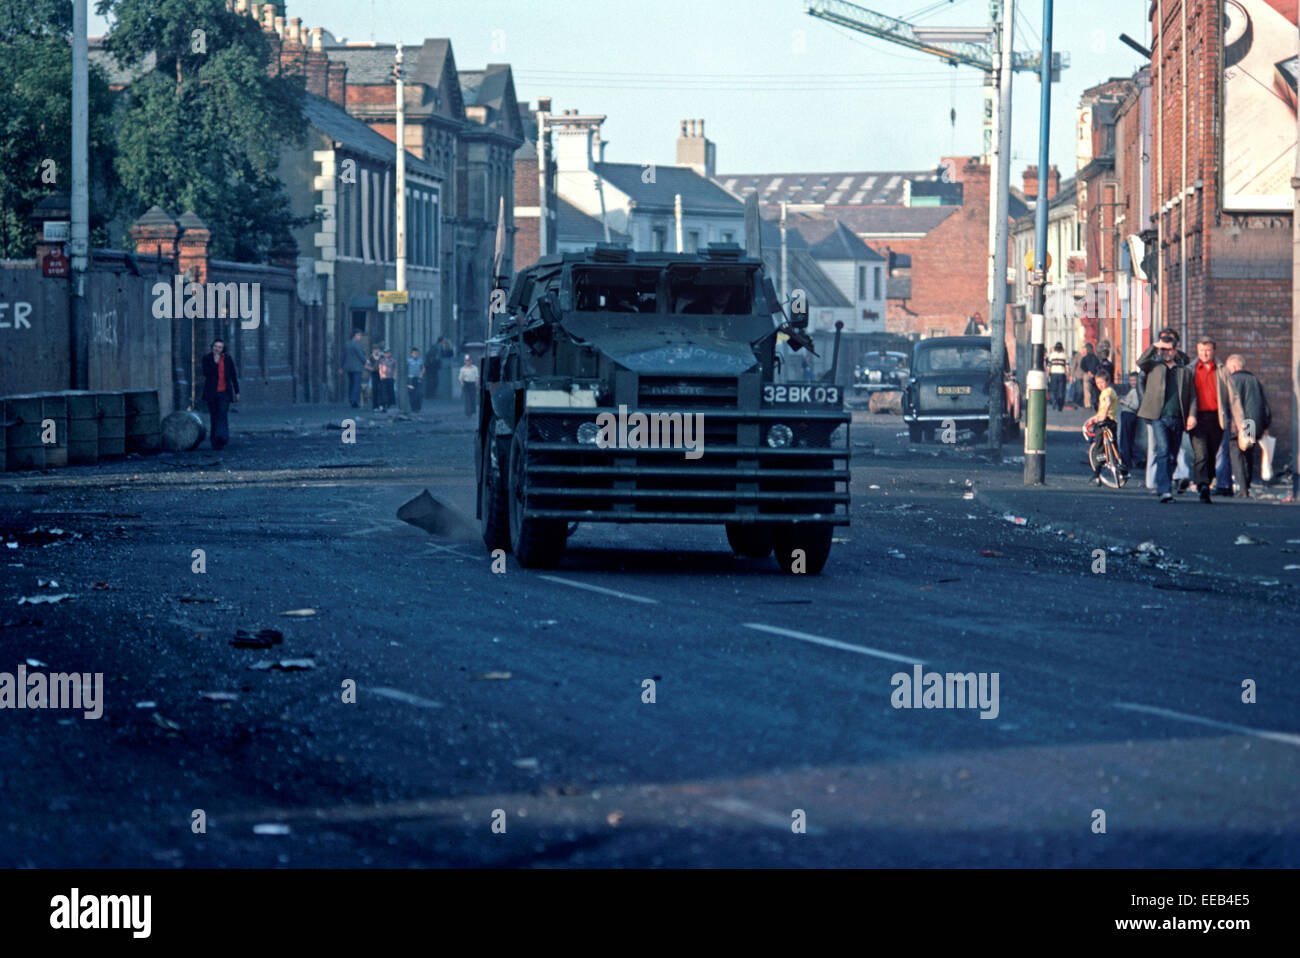 BELFAST, NORTHERN IRELAND - AUGUST 1976. British Army Saracen Personnel Carrier on the Falls Road, West Belfast after a night of Rioting during The Troubles, Northern Ireland. Stock Photo